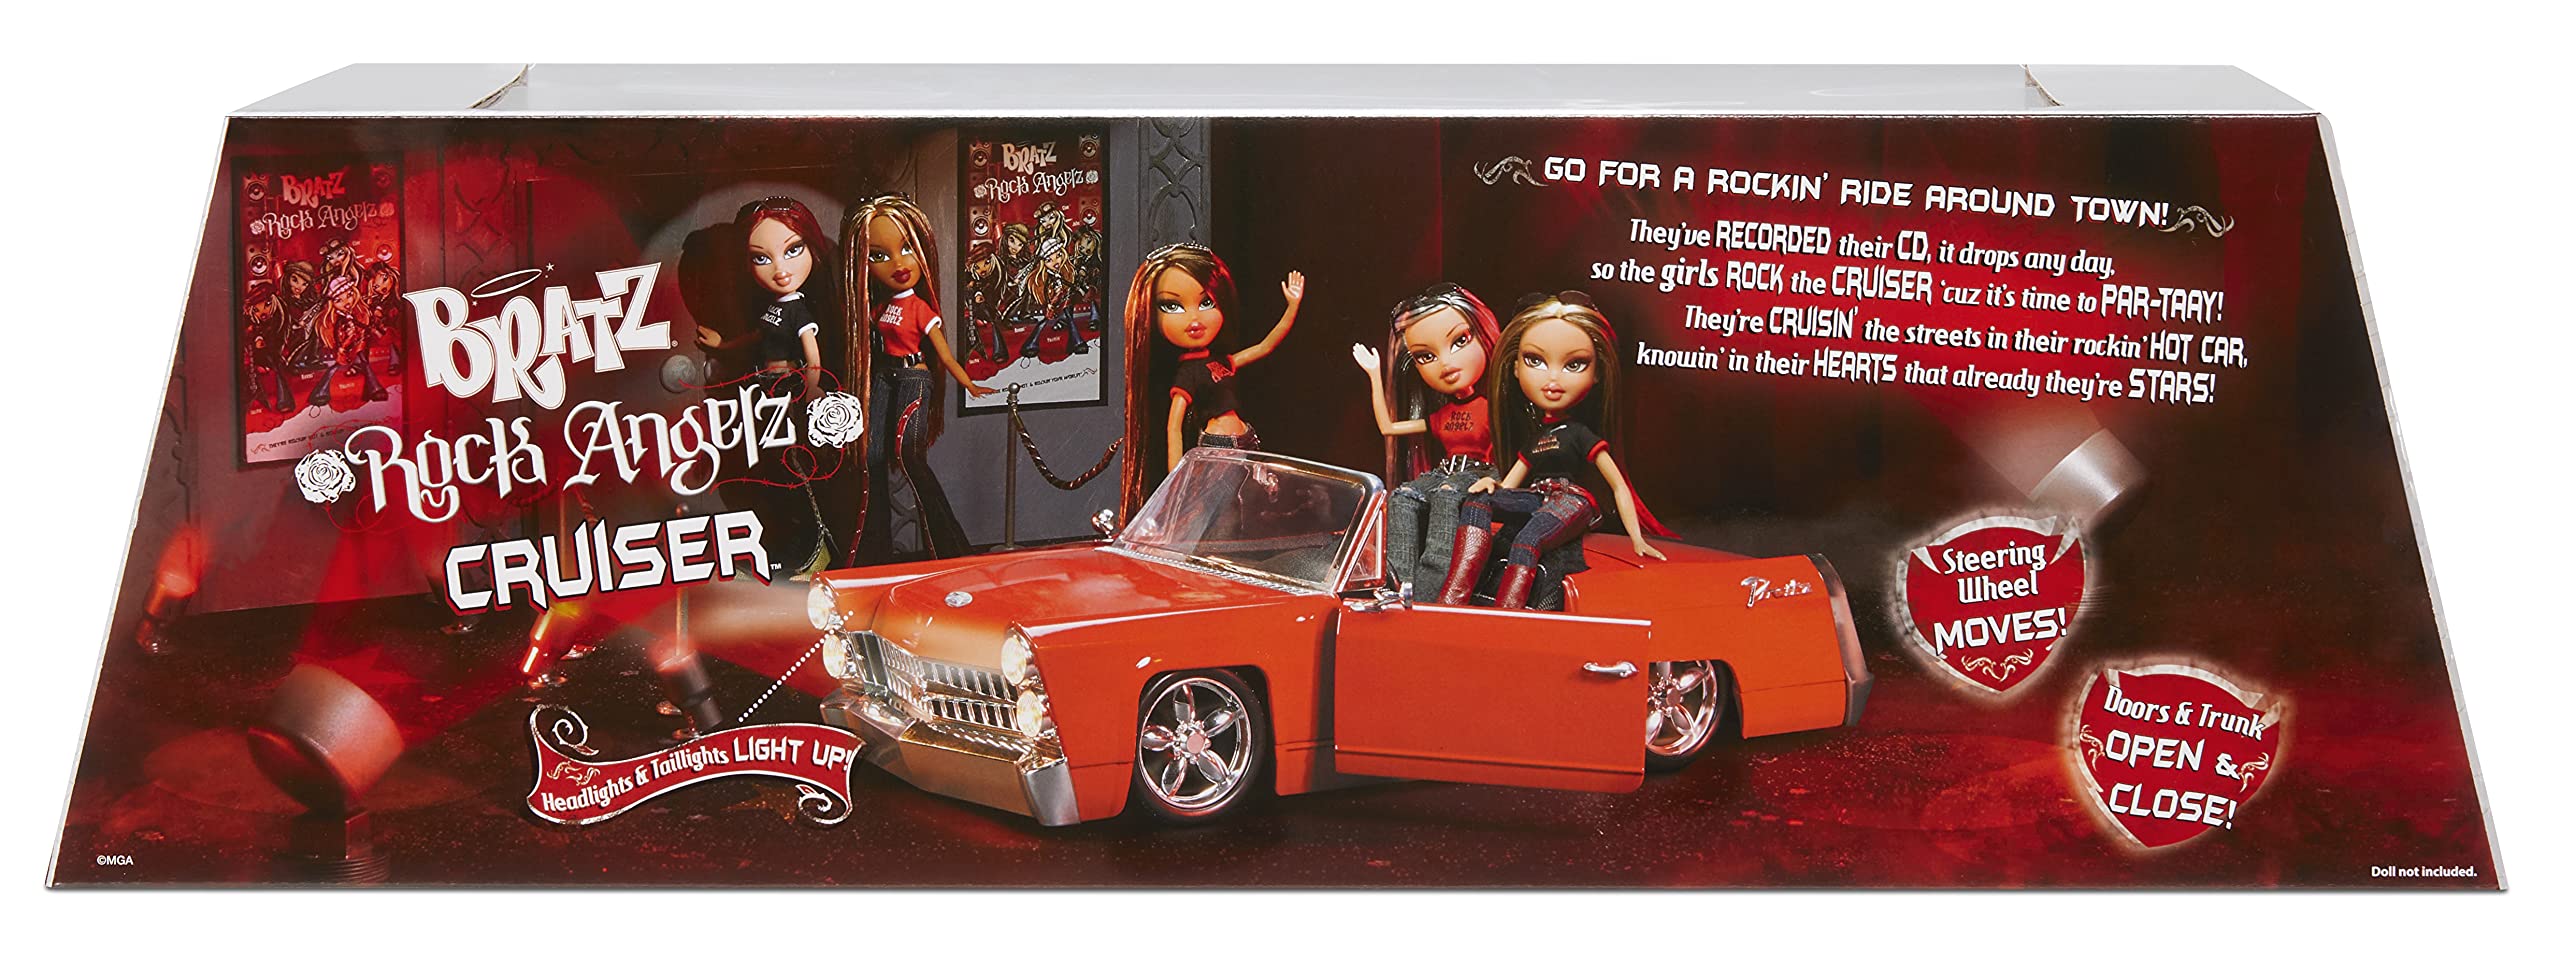 Bratz® Rock Angelz™ 20 Yearz Special Edition Cruiser Car – Convertible Vehicle with Working Doors and Trunk, Lights, Seat Belts and Steering Wheel. fits 2 Fashion Dolls